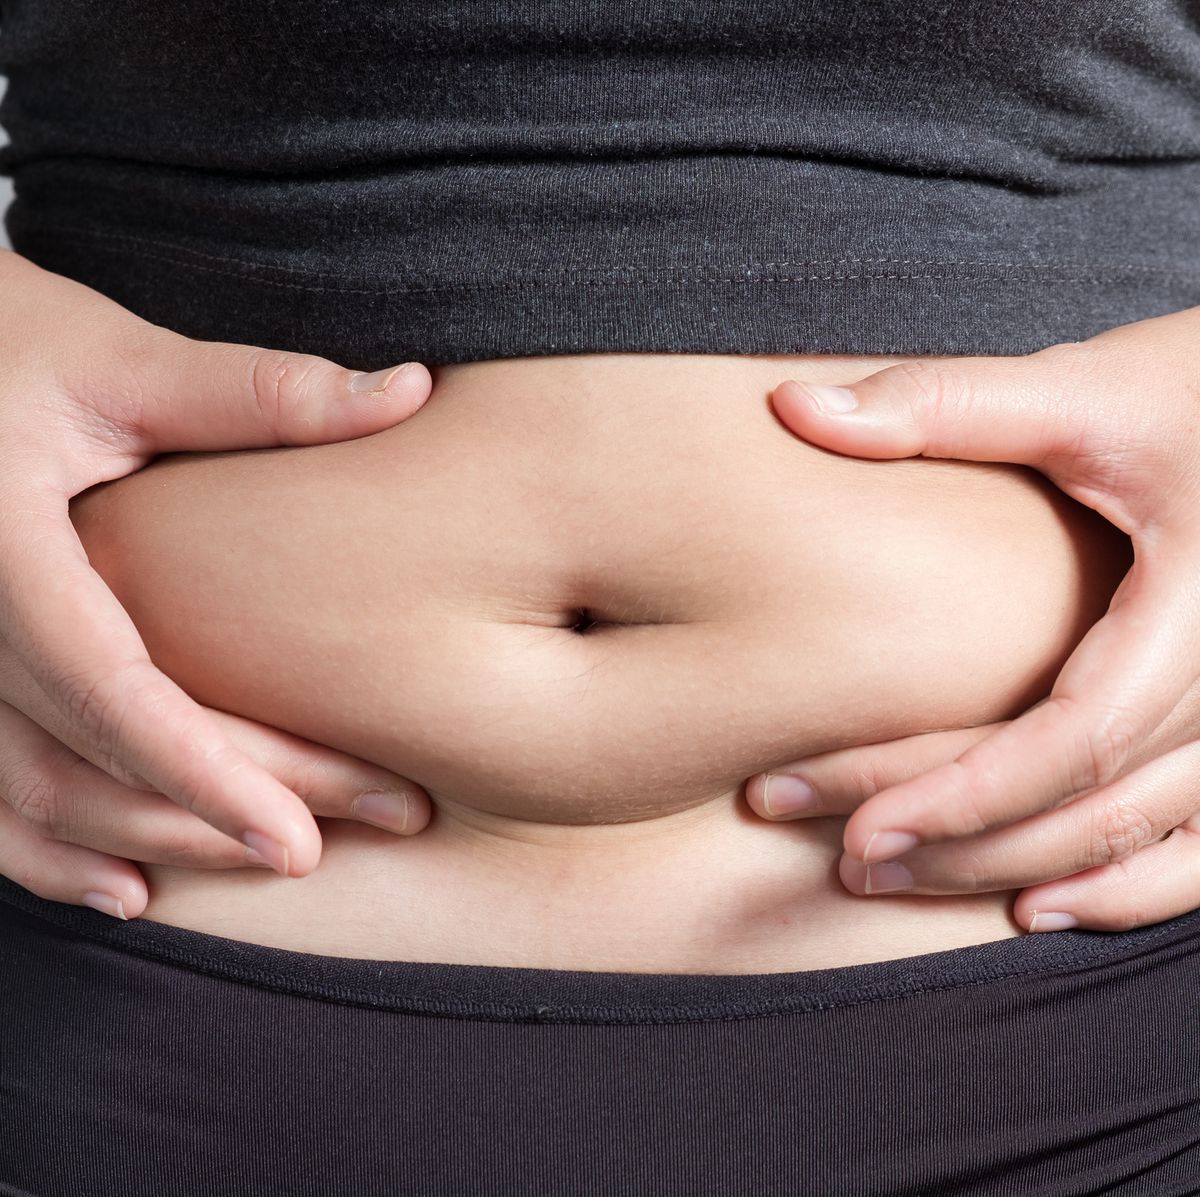 Bloated stomach: causes, remedies and prevention tips